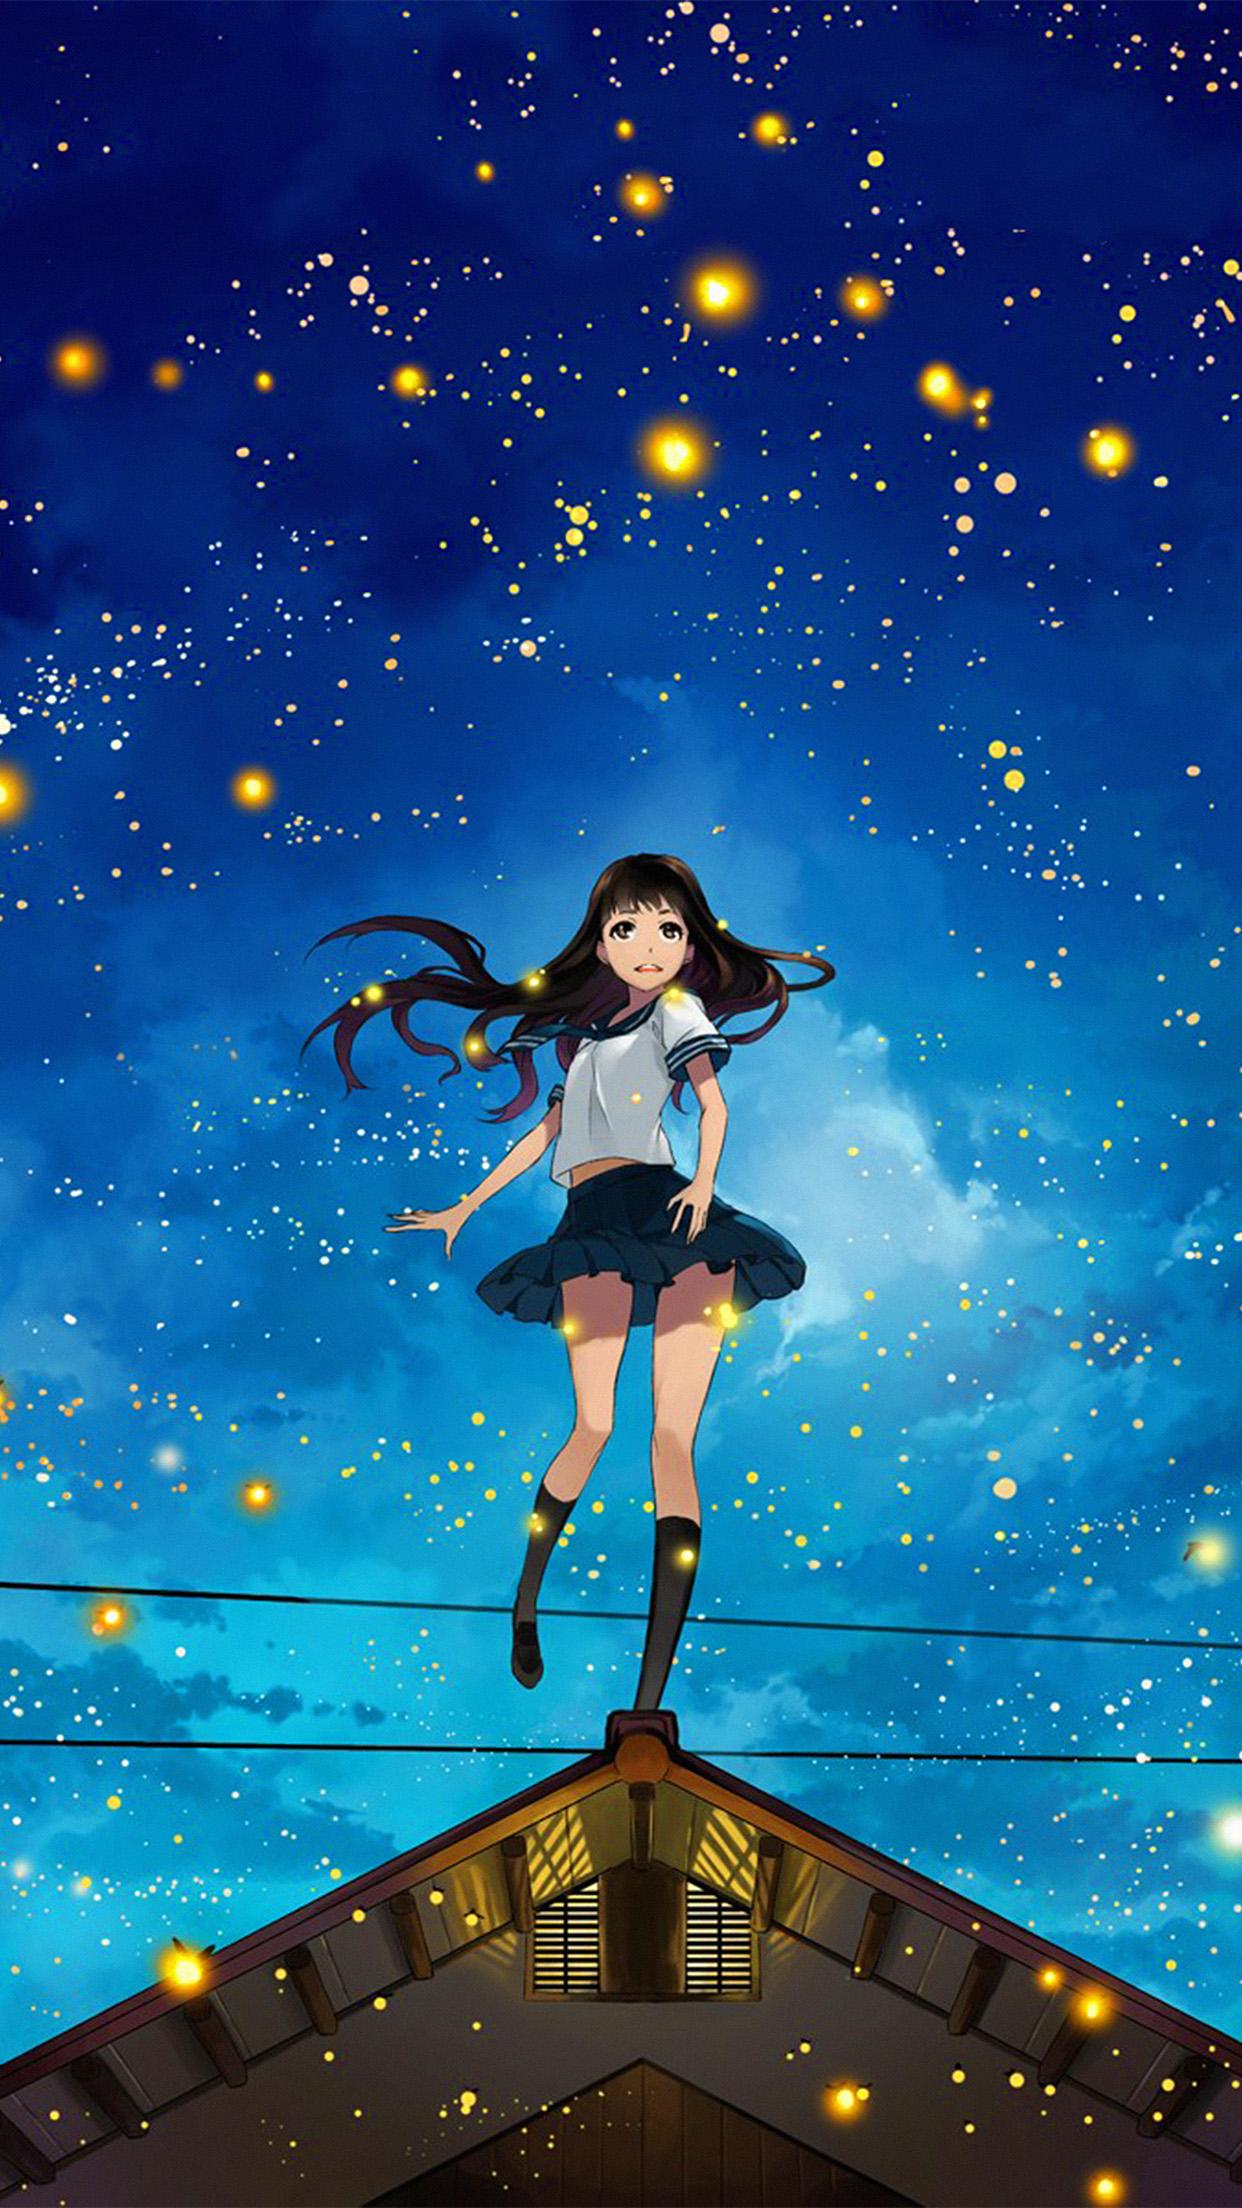 Girl Anime Star Space Night Illustration Art Android